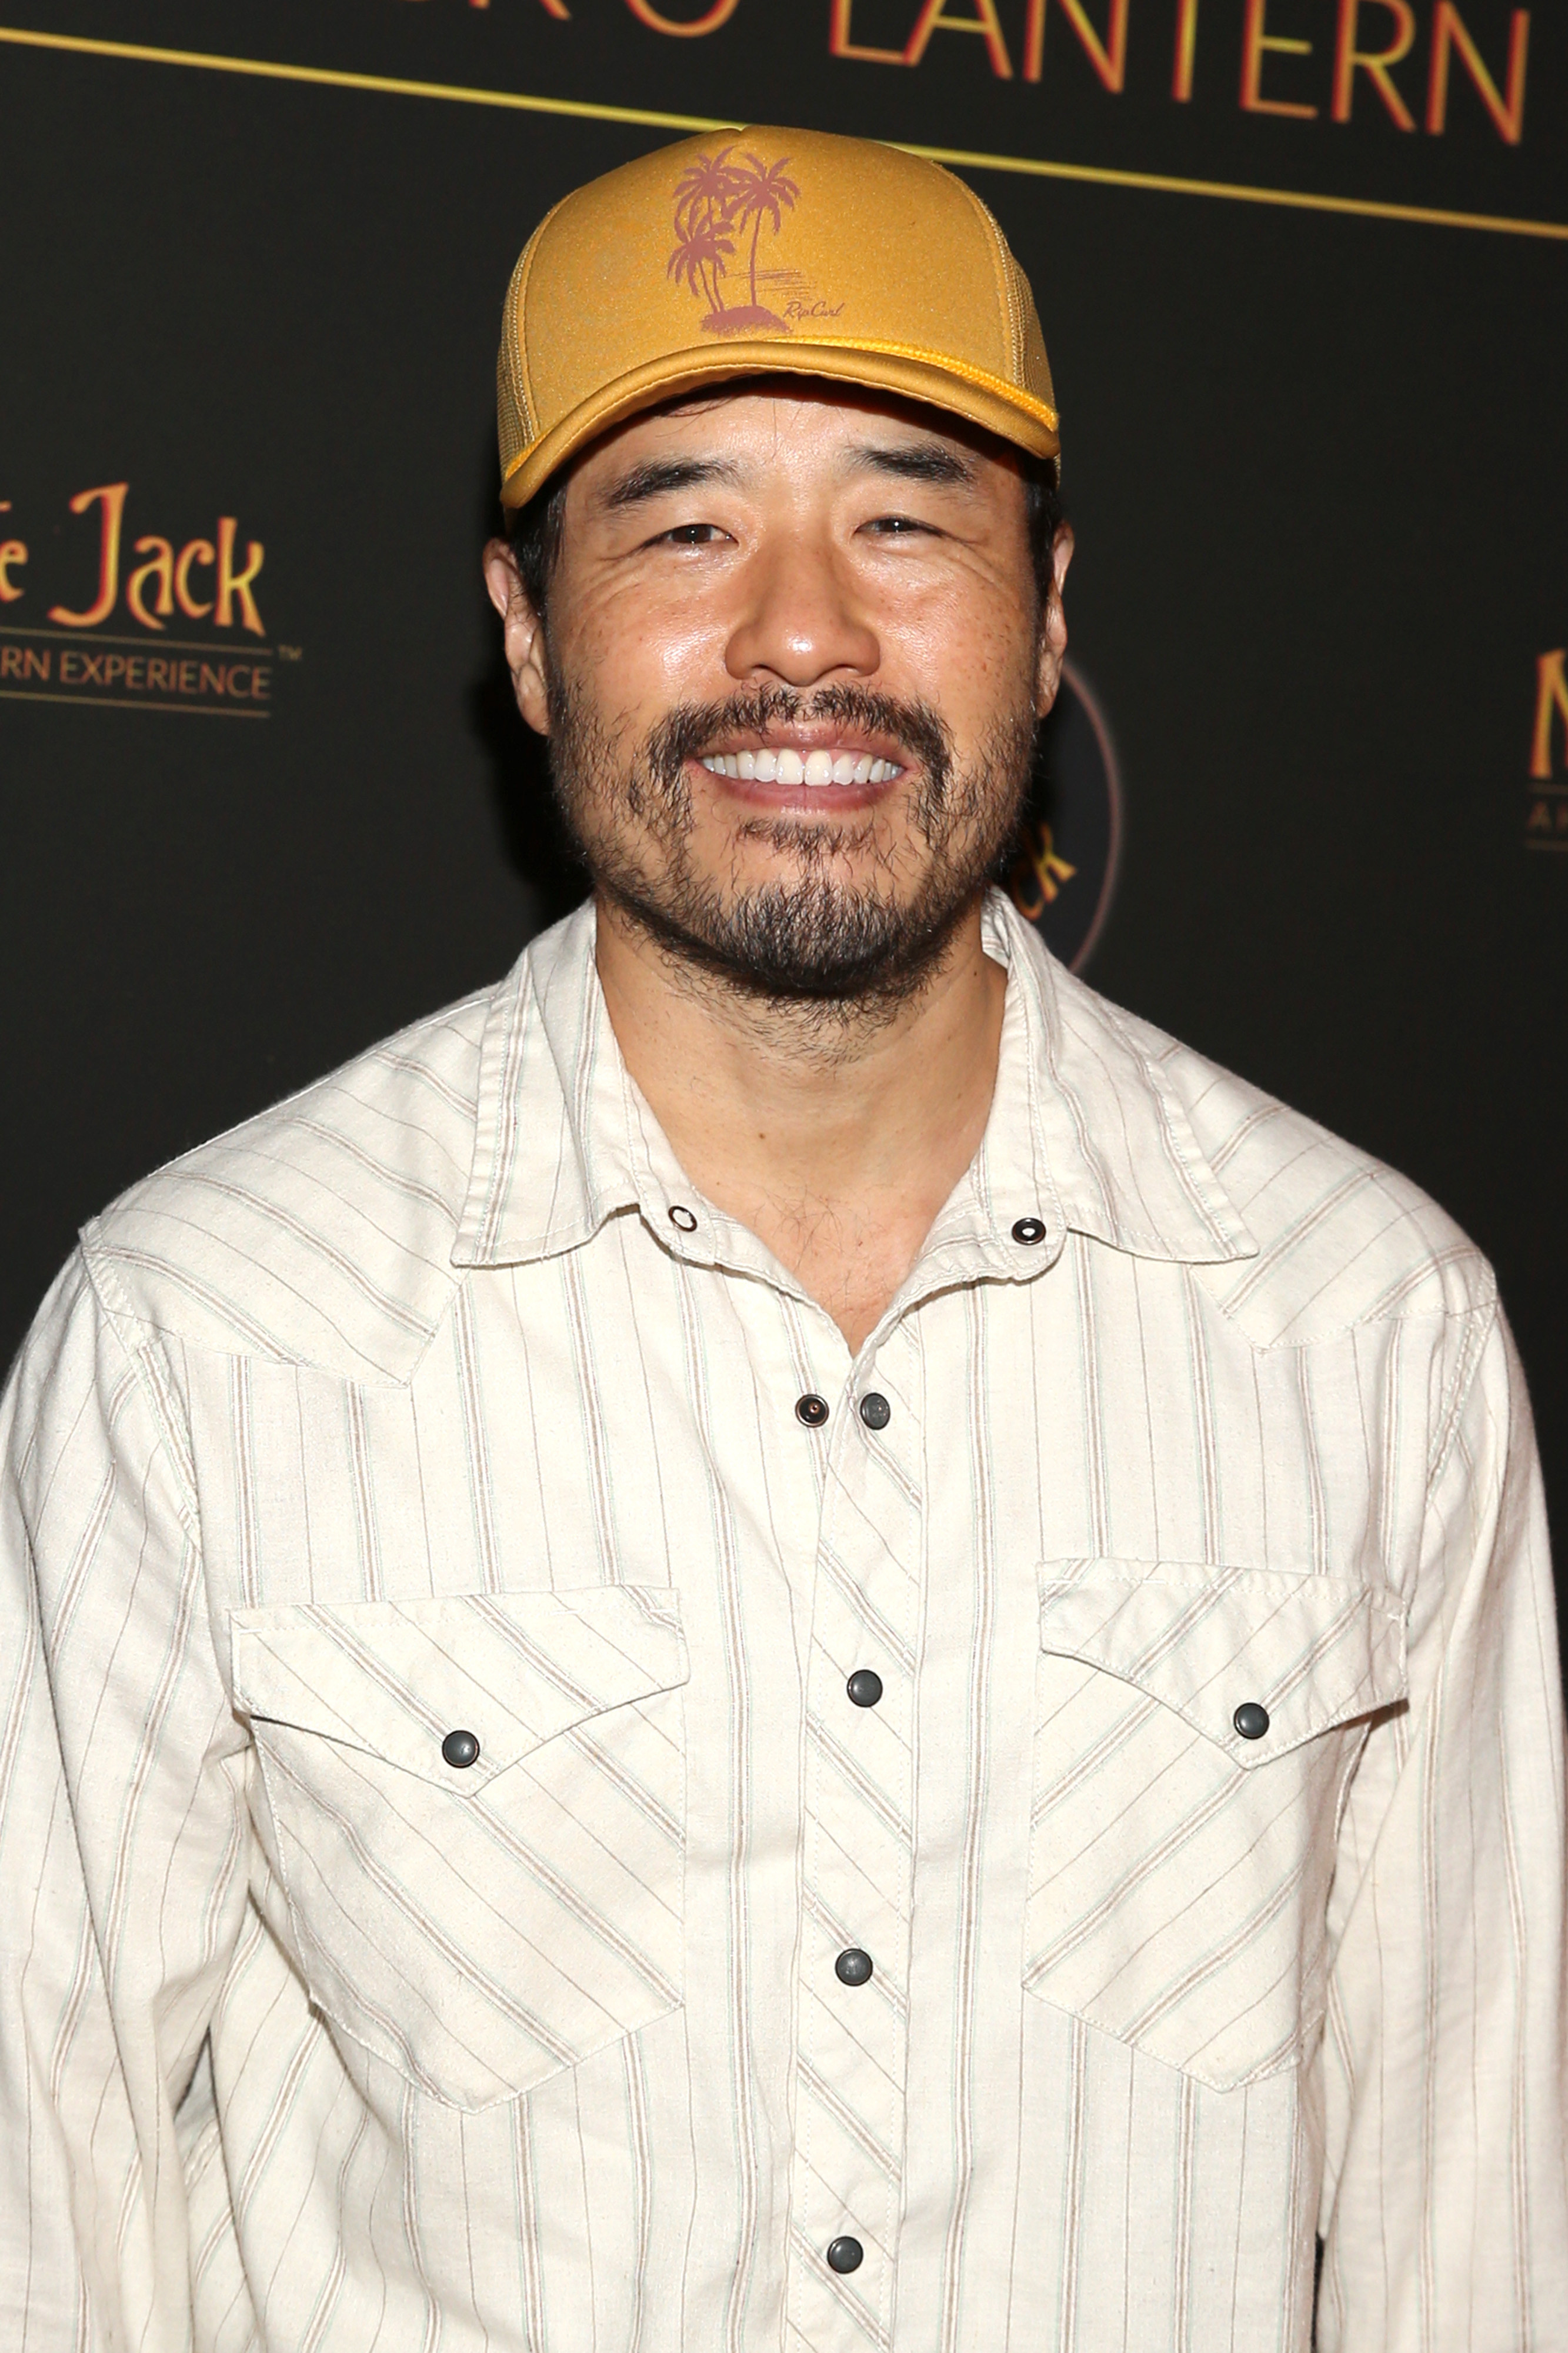 Randall smiling with a yellow baseball cap and white striped shirt